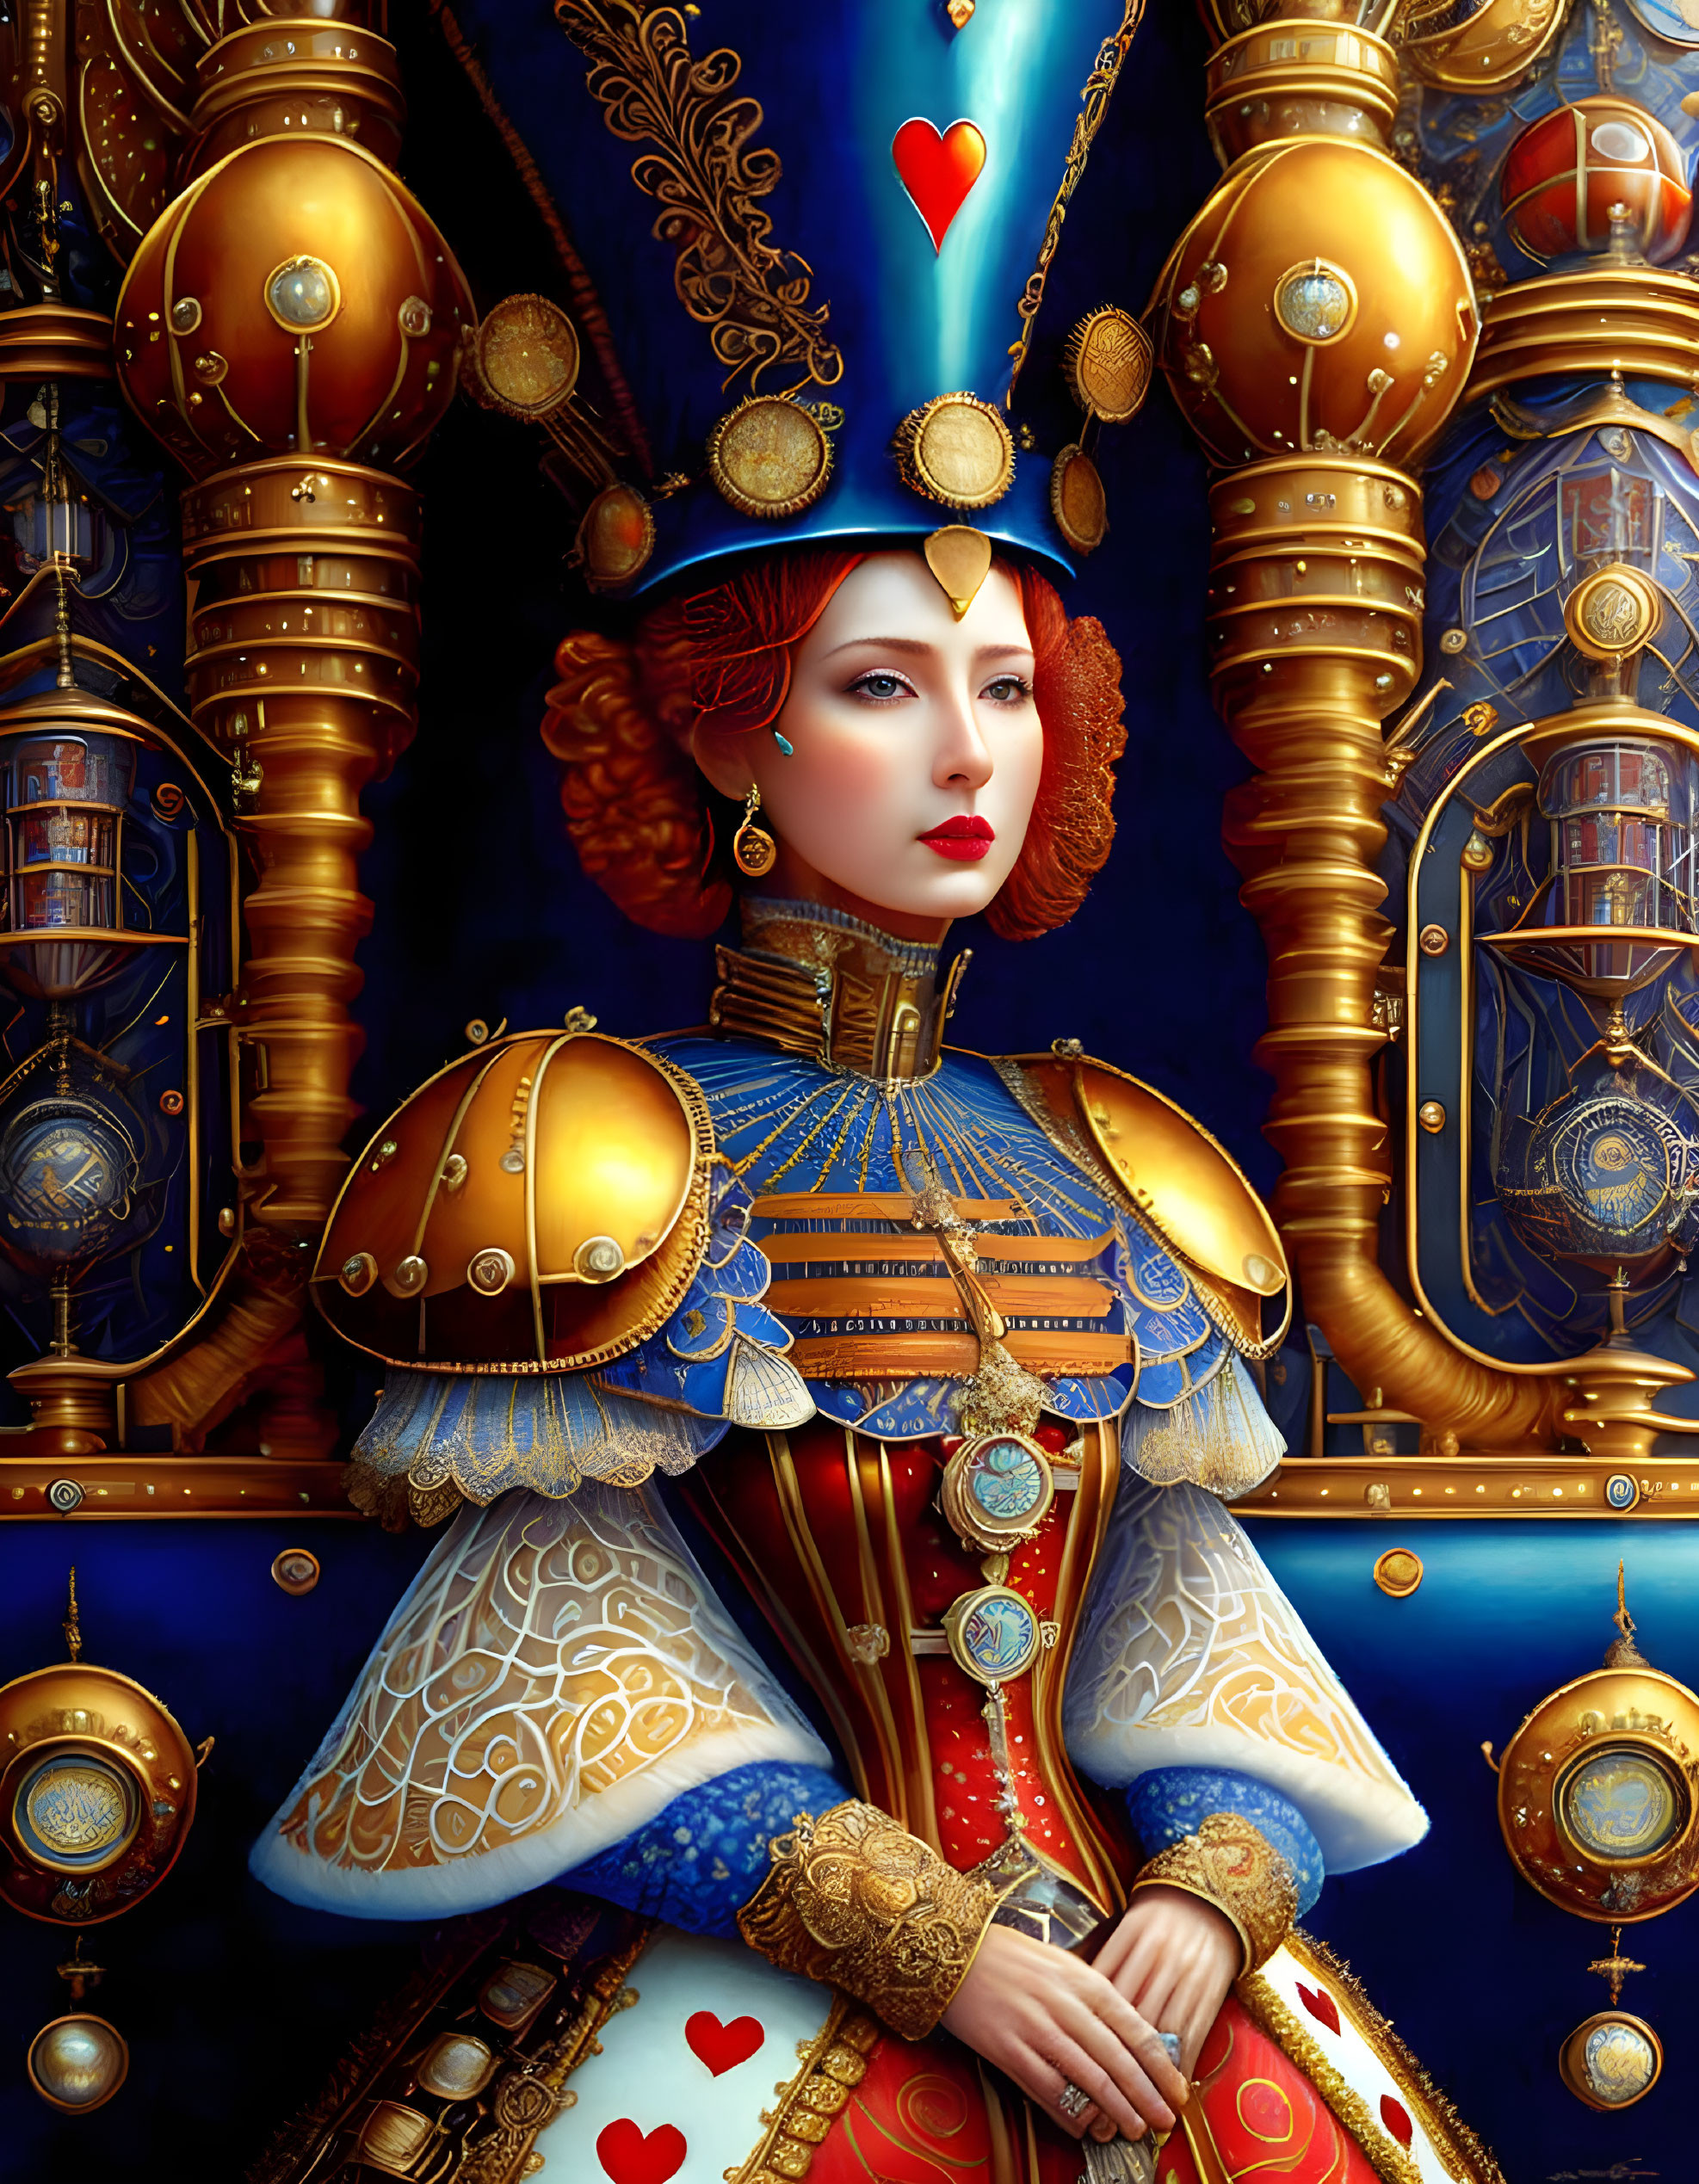 Ornate Red-Haired Woman in Regal Attire with Gold and Blue Elements